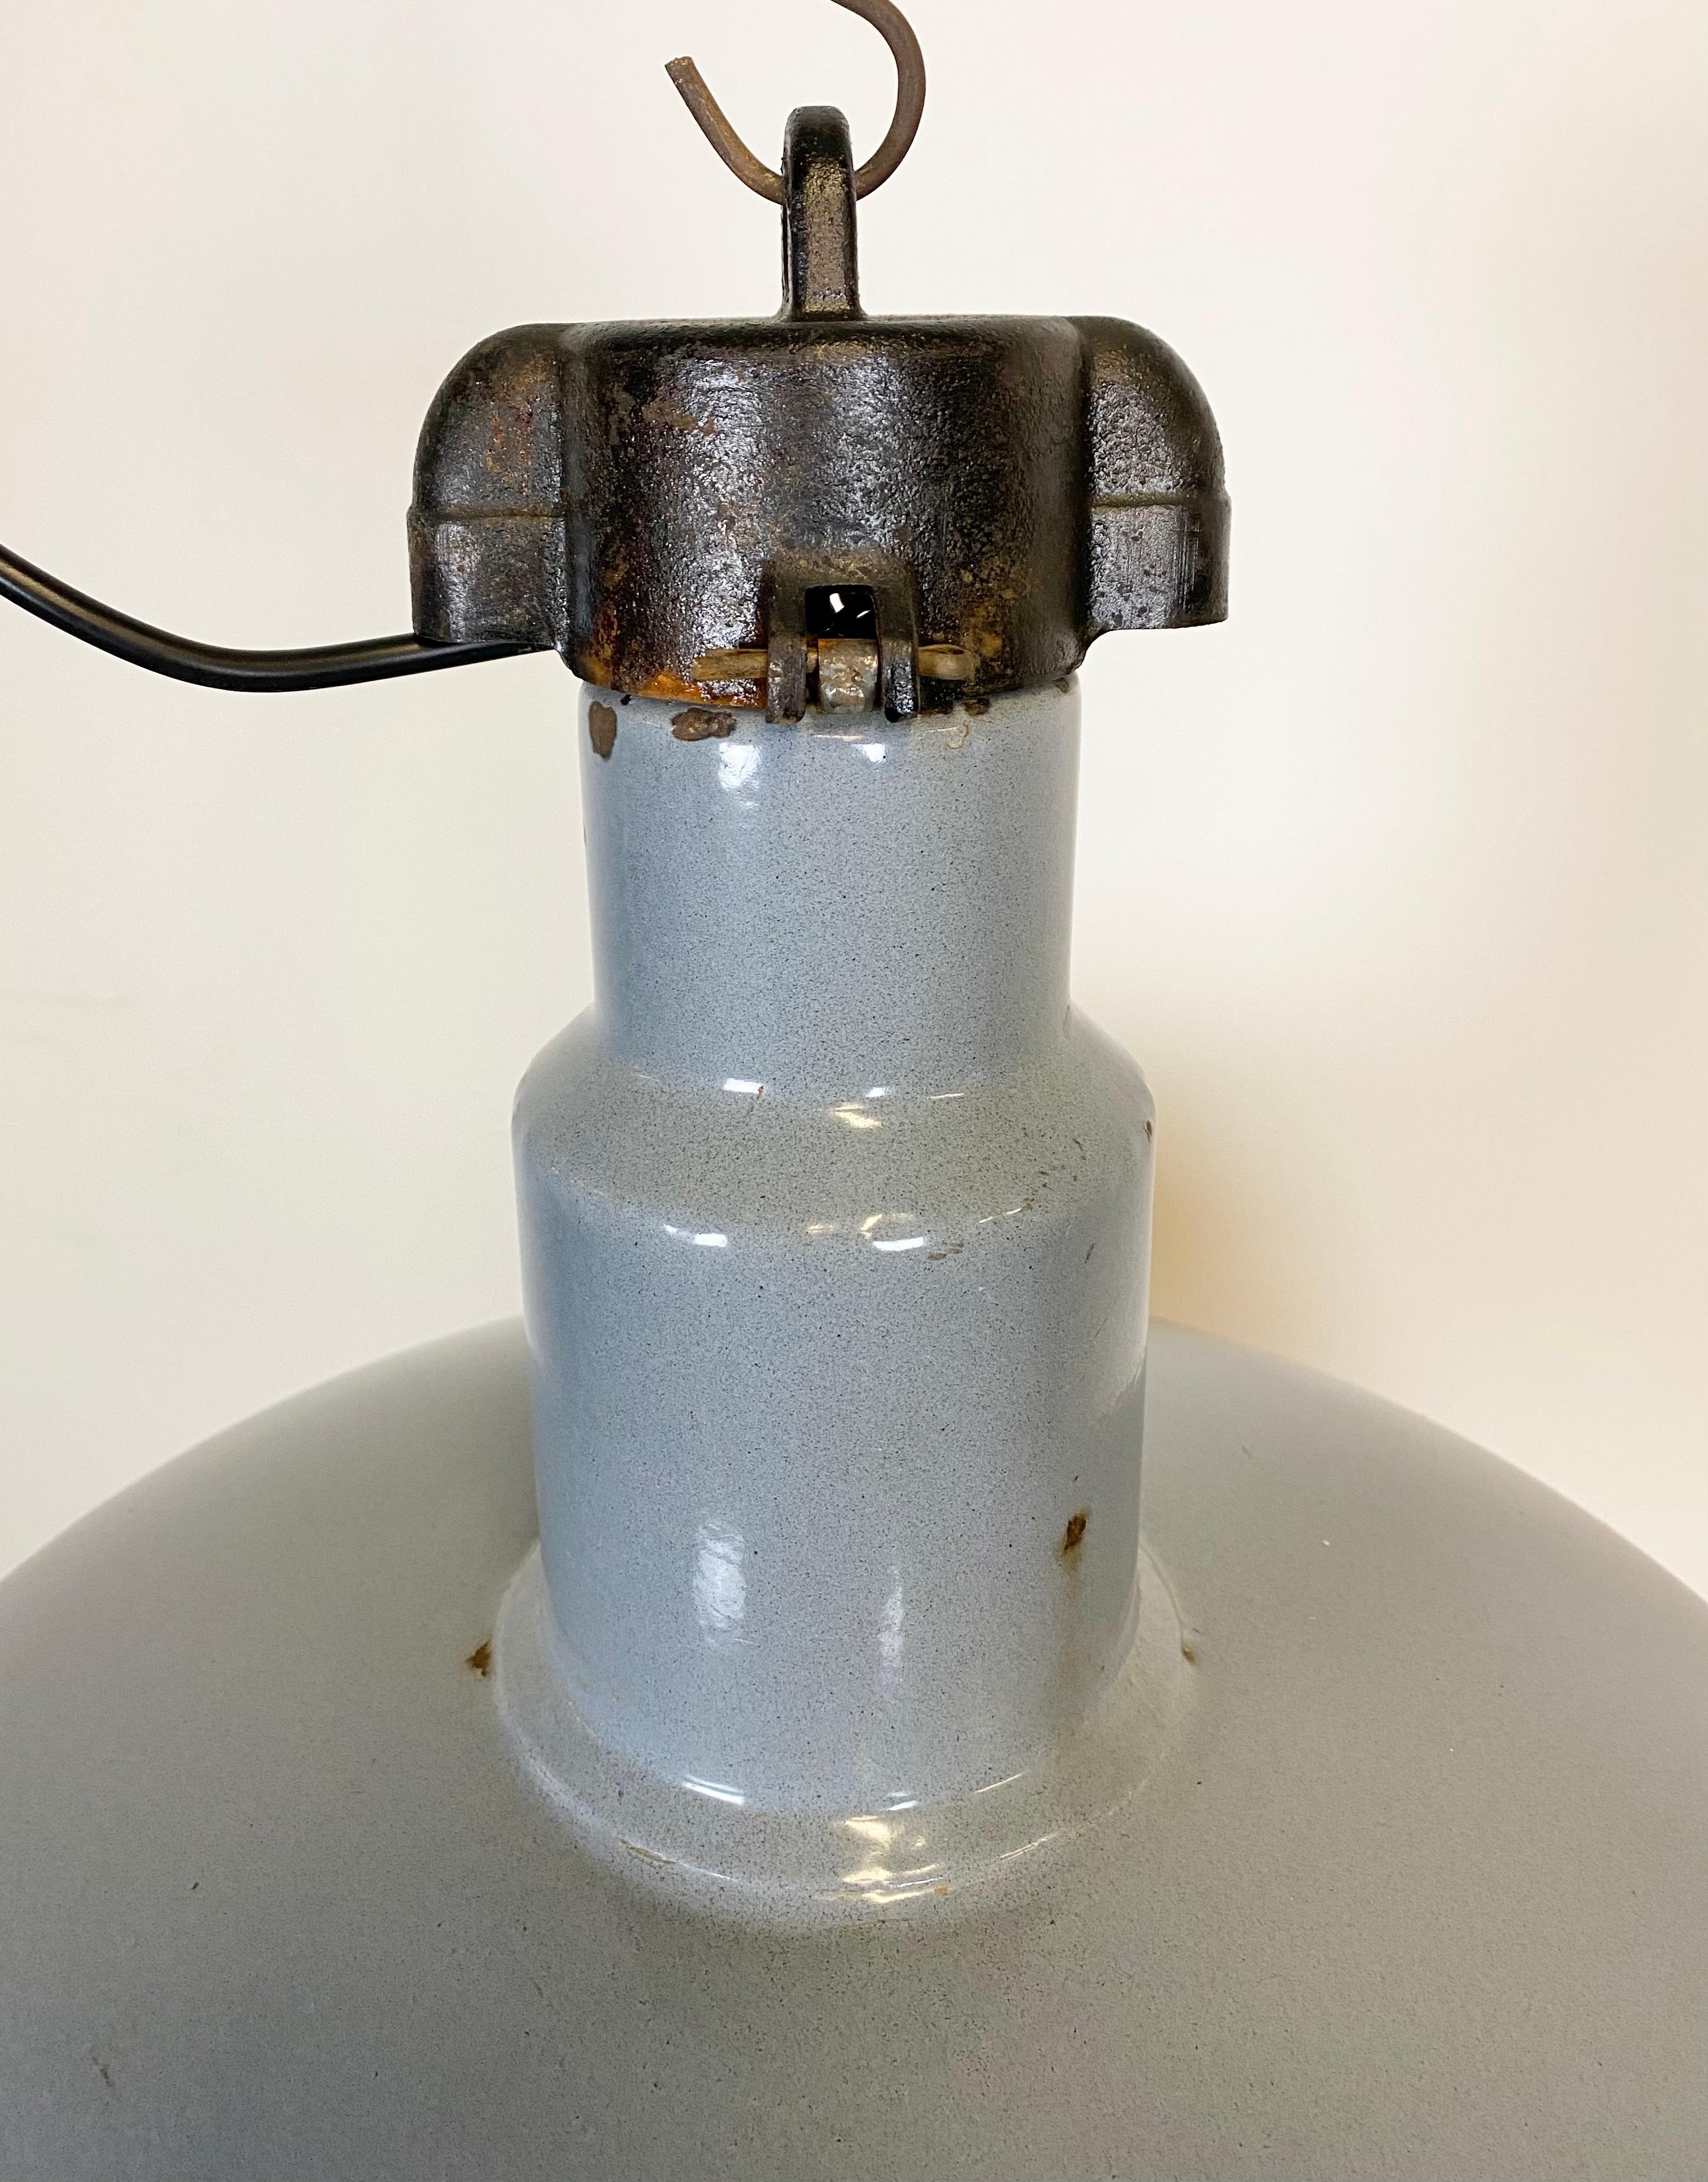 This Industrial lamp was made in former Czechoslovakia during the 1950s. It features a grey enamel shade with white enamel interior. Cast iron top. New porcelain socket requires E 27 lightbulbs. The weight of the lamp is 4 kg.